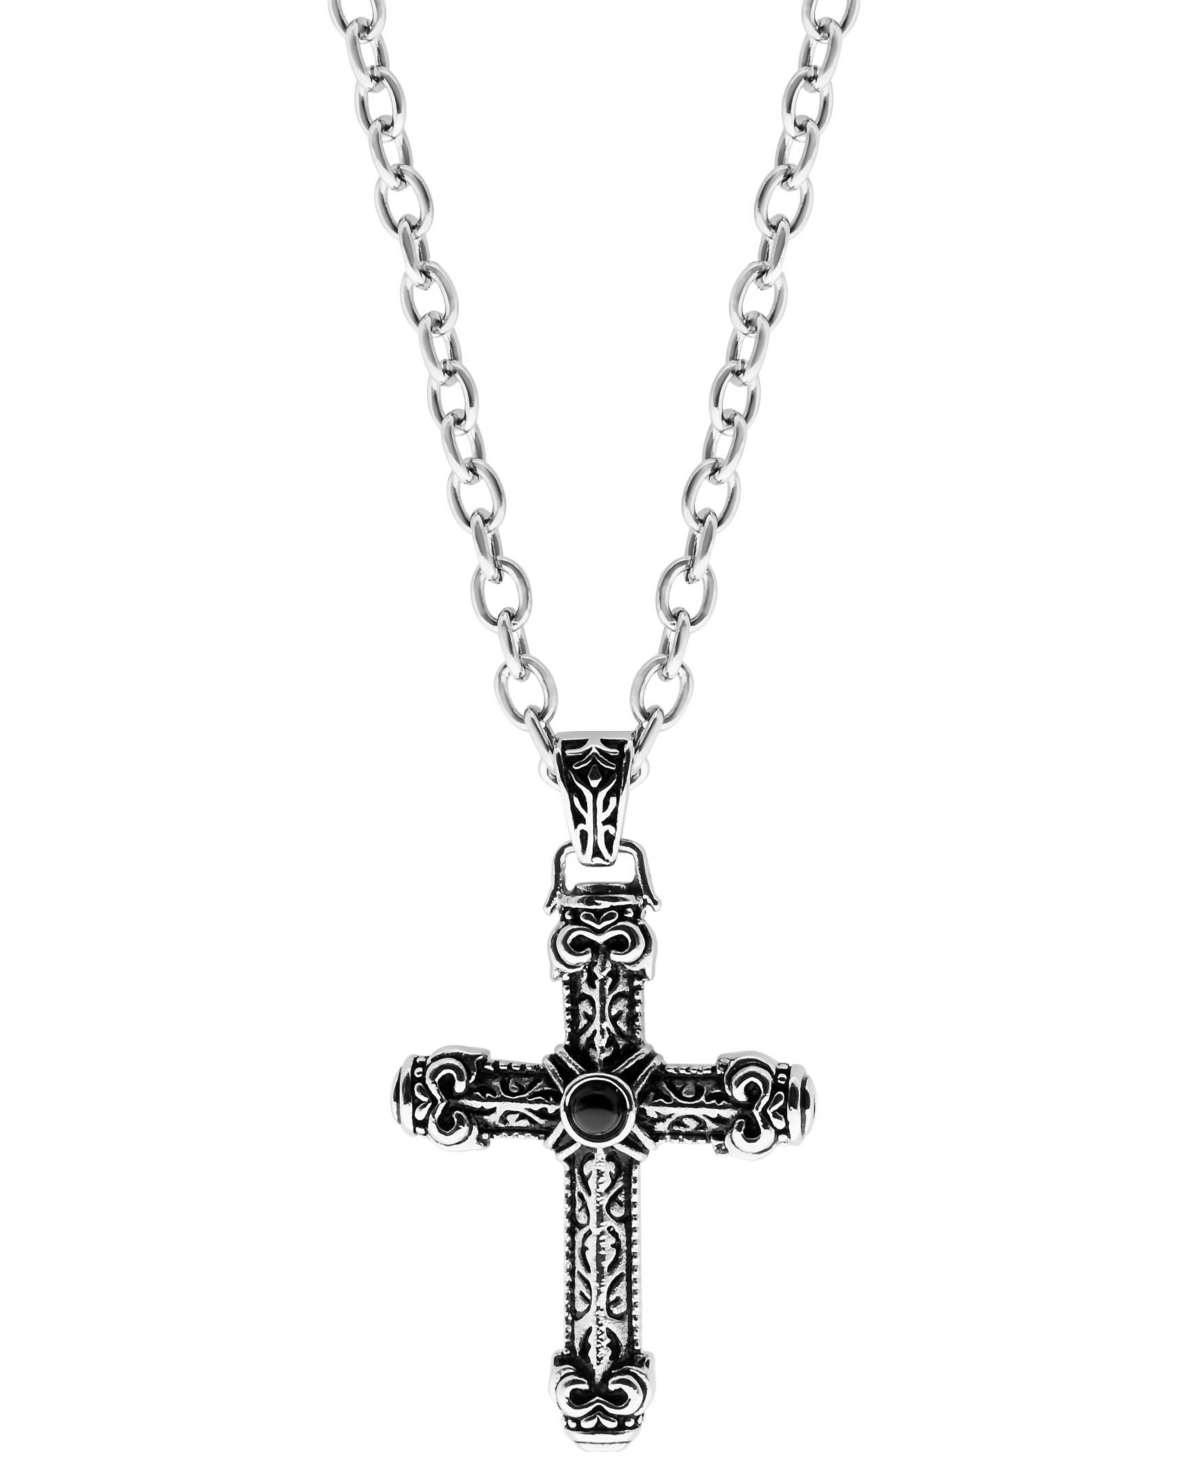 Sutton Stainless Steel Antique Cross Pendant Necklace - Silver